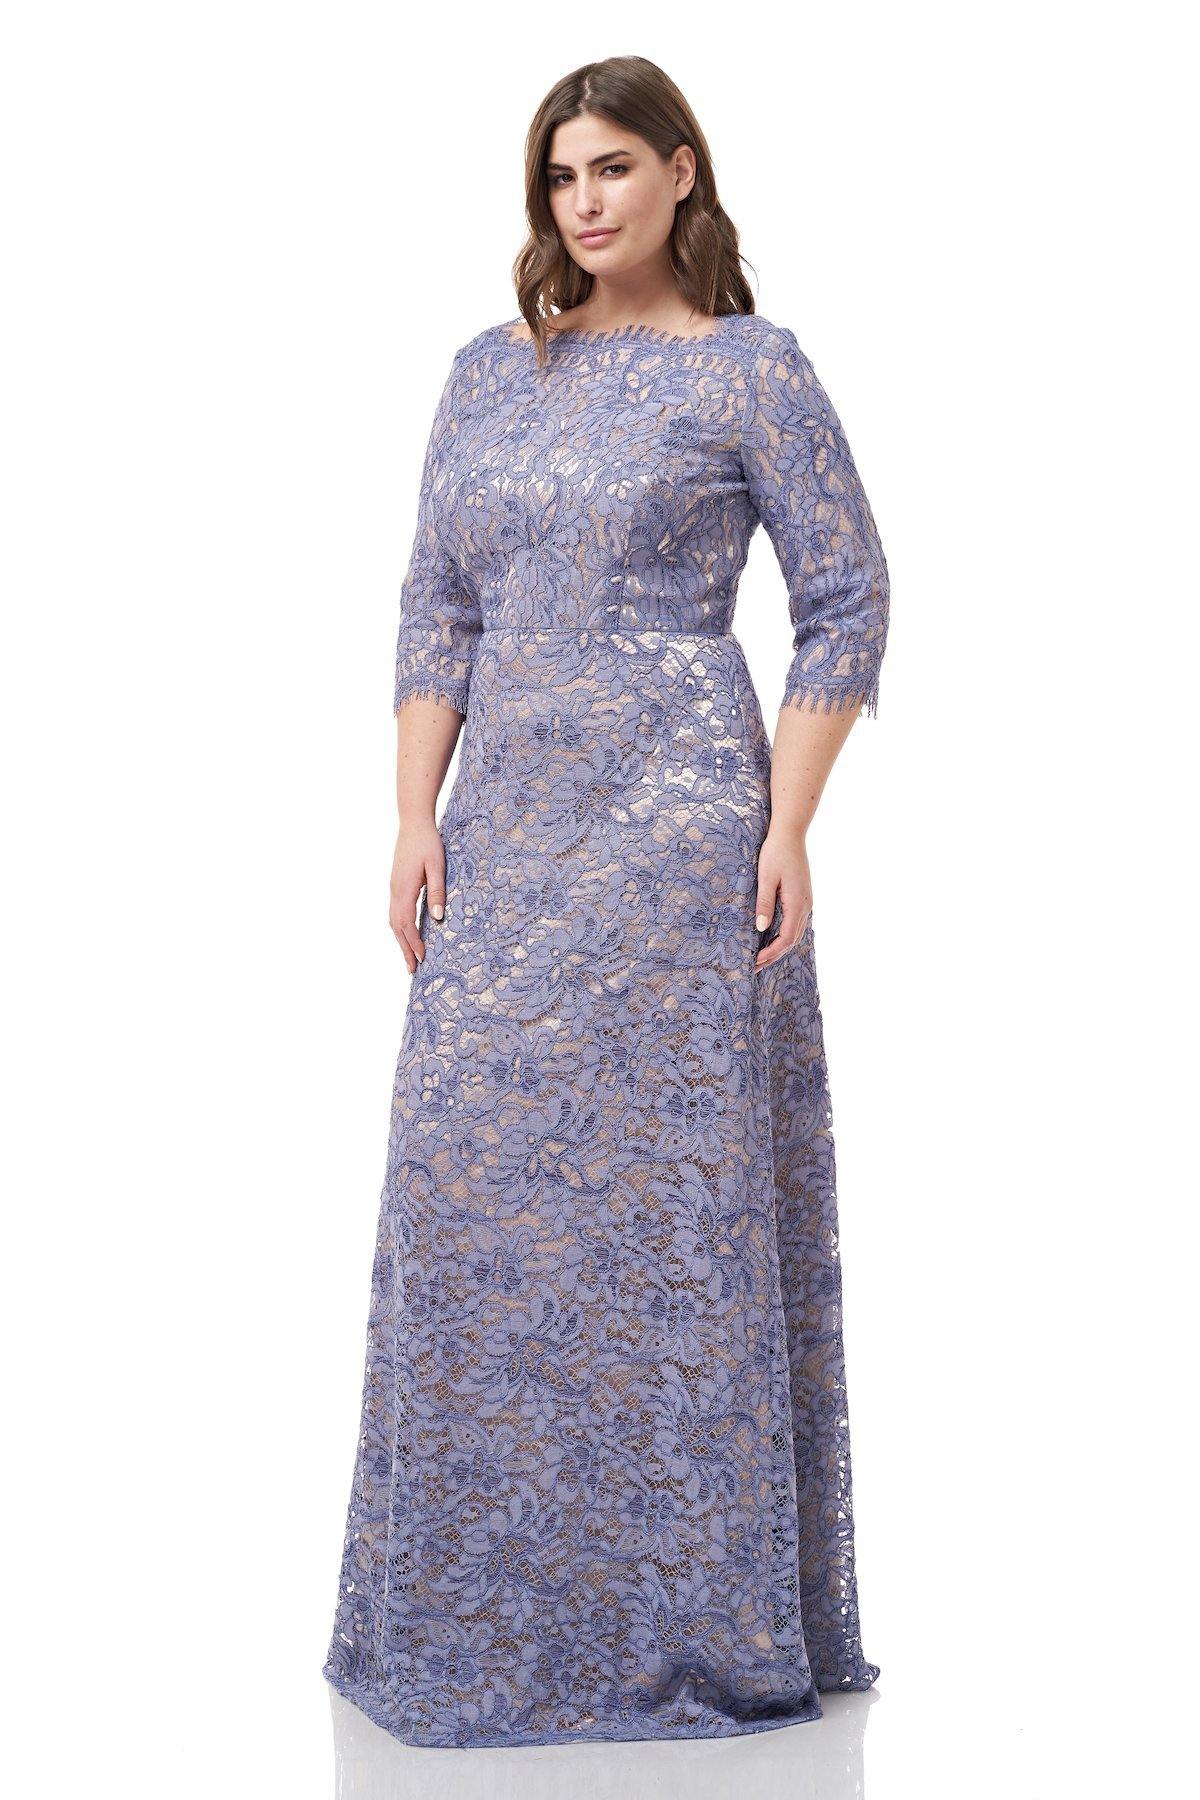 JS Collections Long Formal Plus Size Dress 866467W - The Dress Outlet